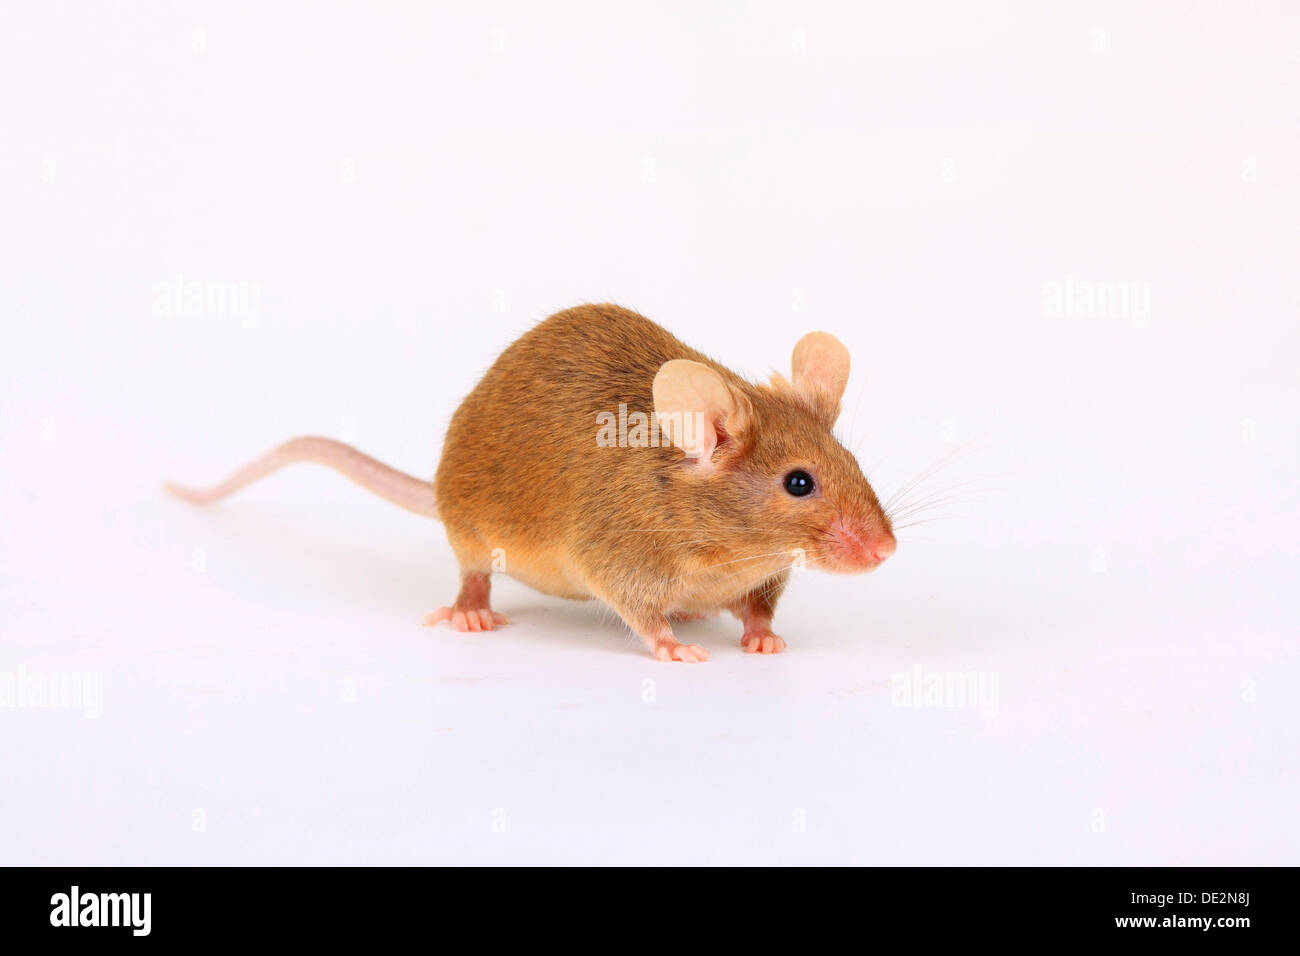 Fancy Mouse, a domesticated form of the House Mouse (Mus musculus) Stock Photo